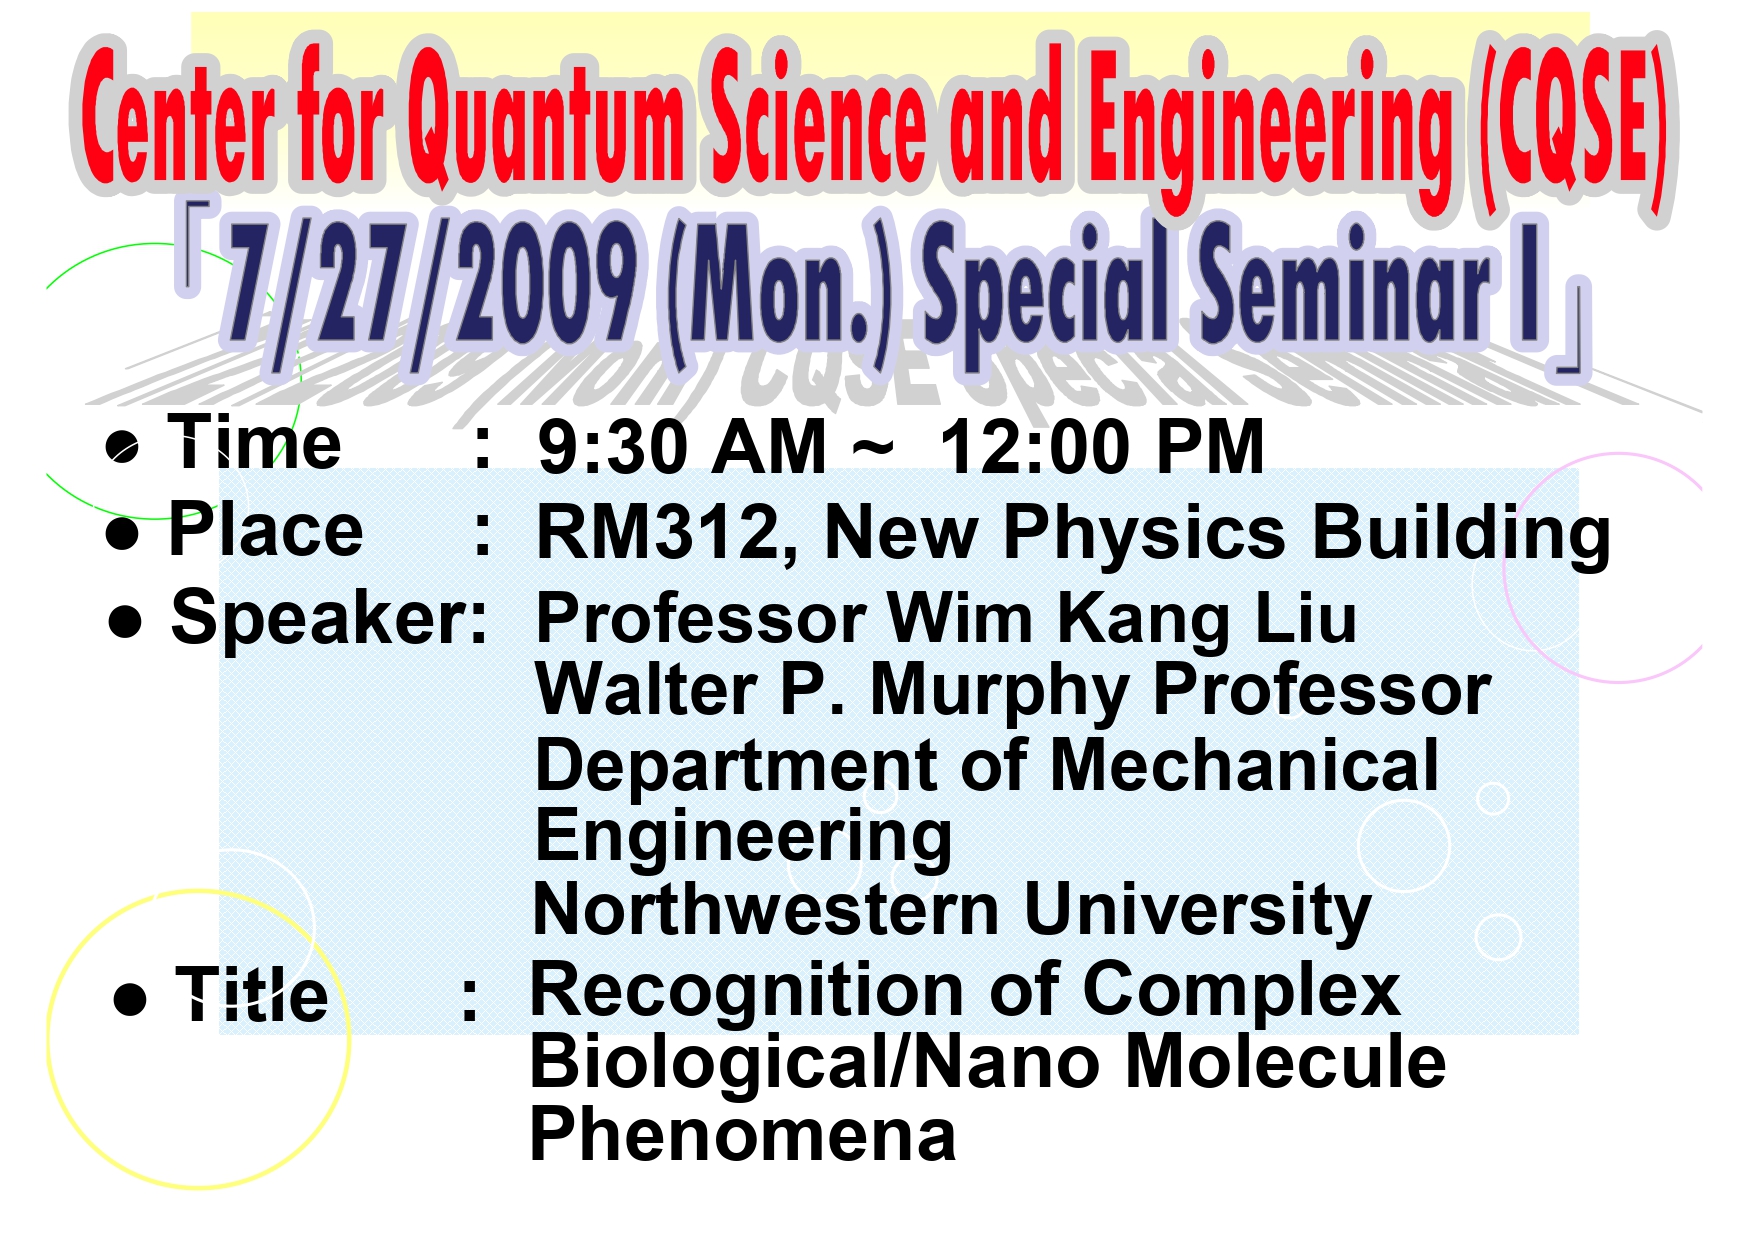 Summer Special Seminars of Center for Quantum Science and Engineering (CQSE)